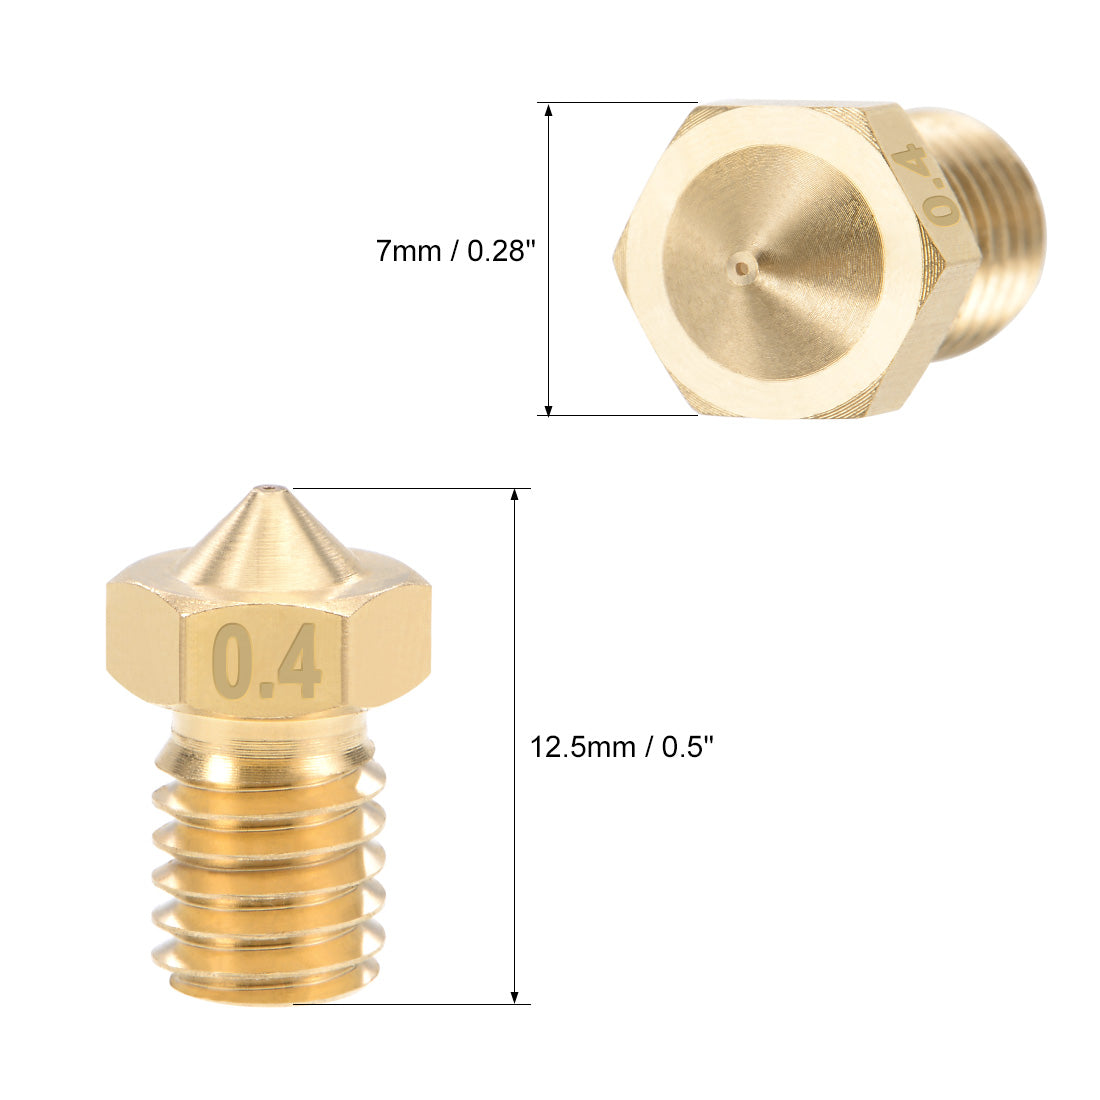 uxcell Uxcell 0.4mm 3D Printer Nozzle Head M6 for V5 V6 1.75mm Extruder Print, Brass 2pcs